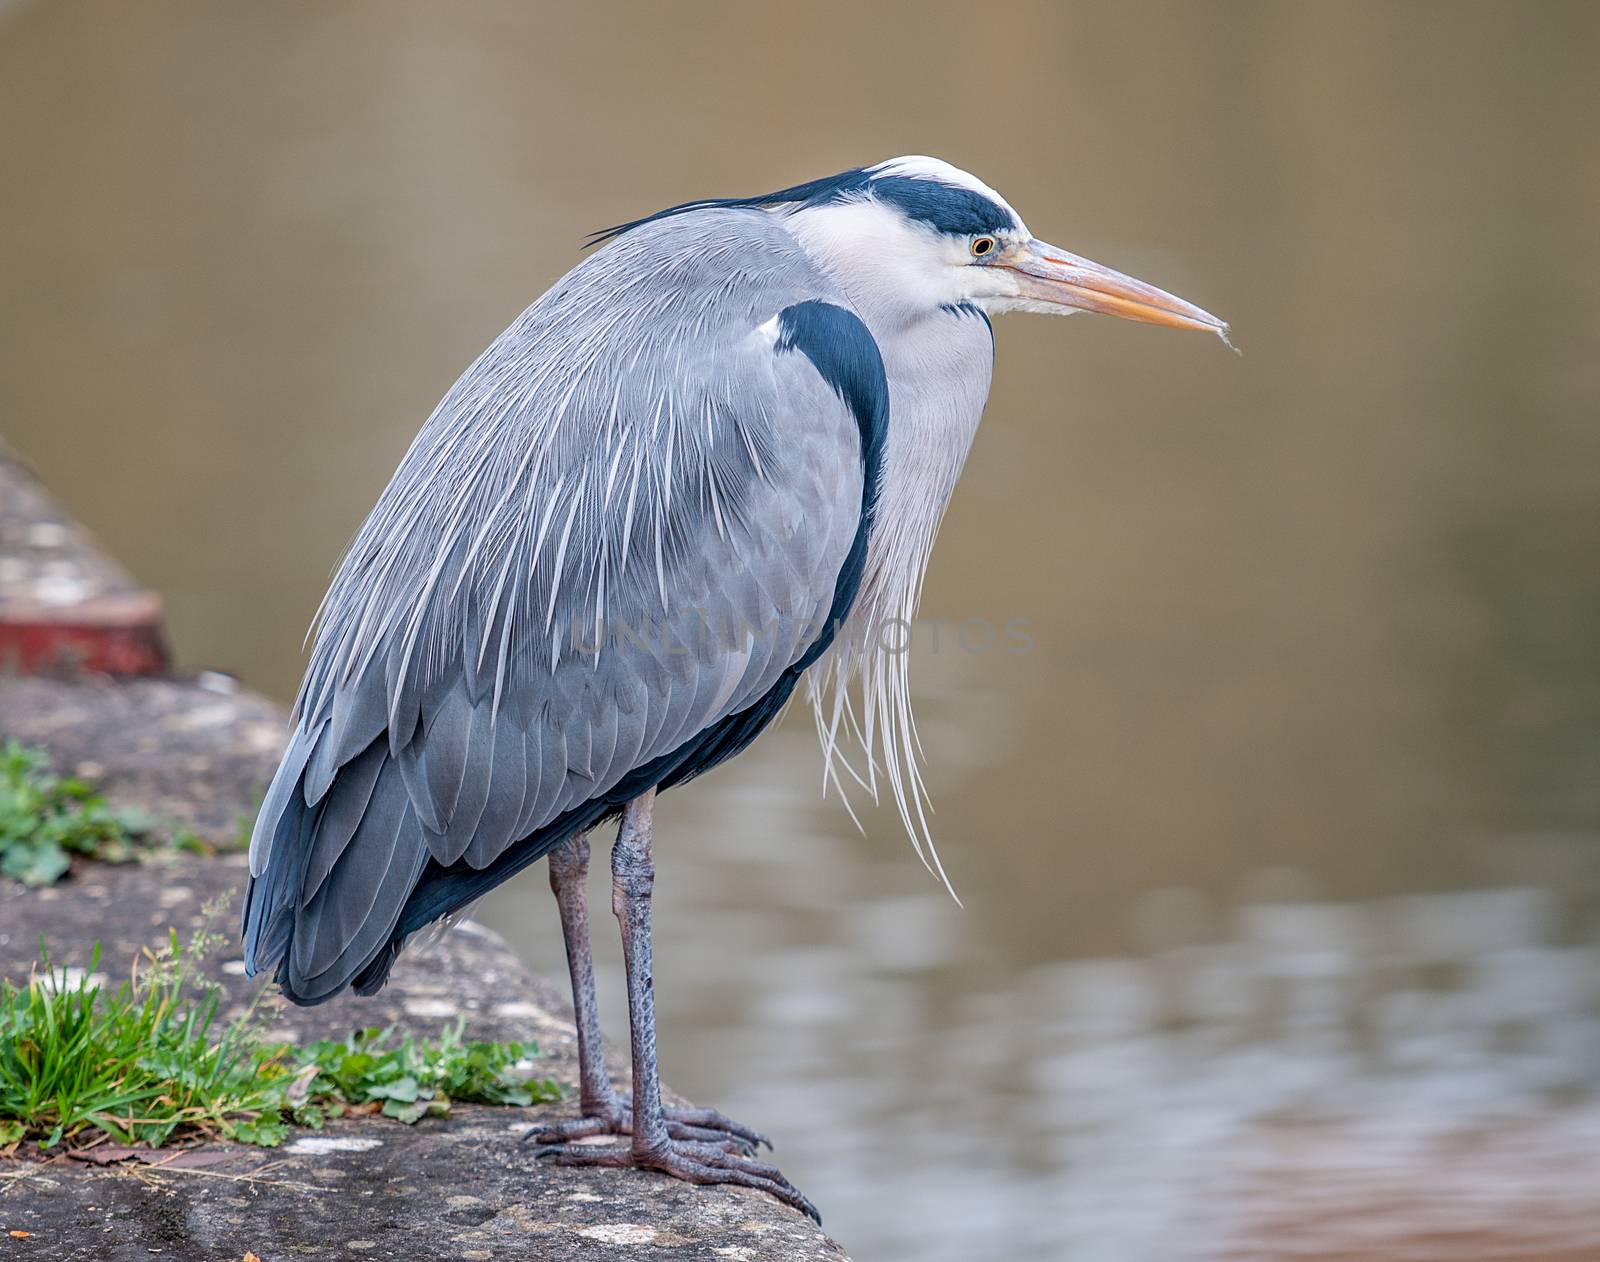 heron on side of kennet and avon canal in bath by sirspread